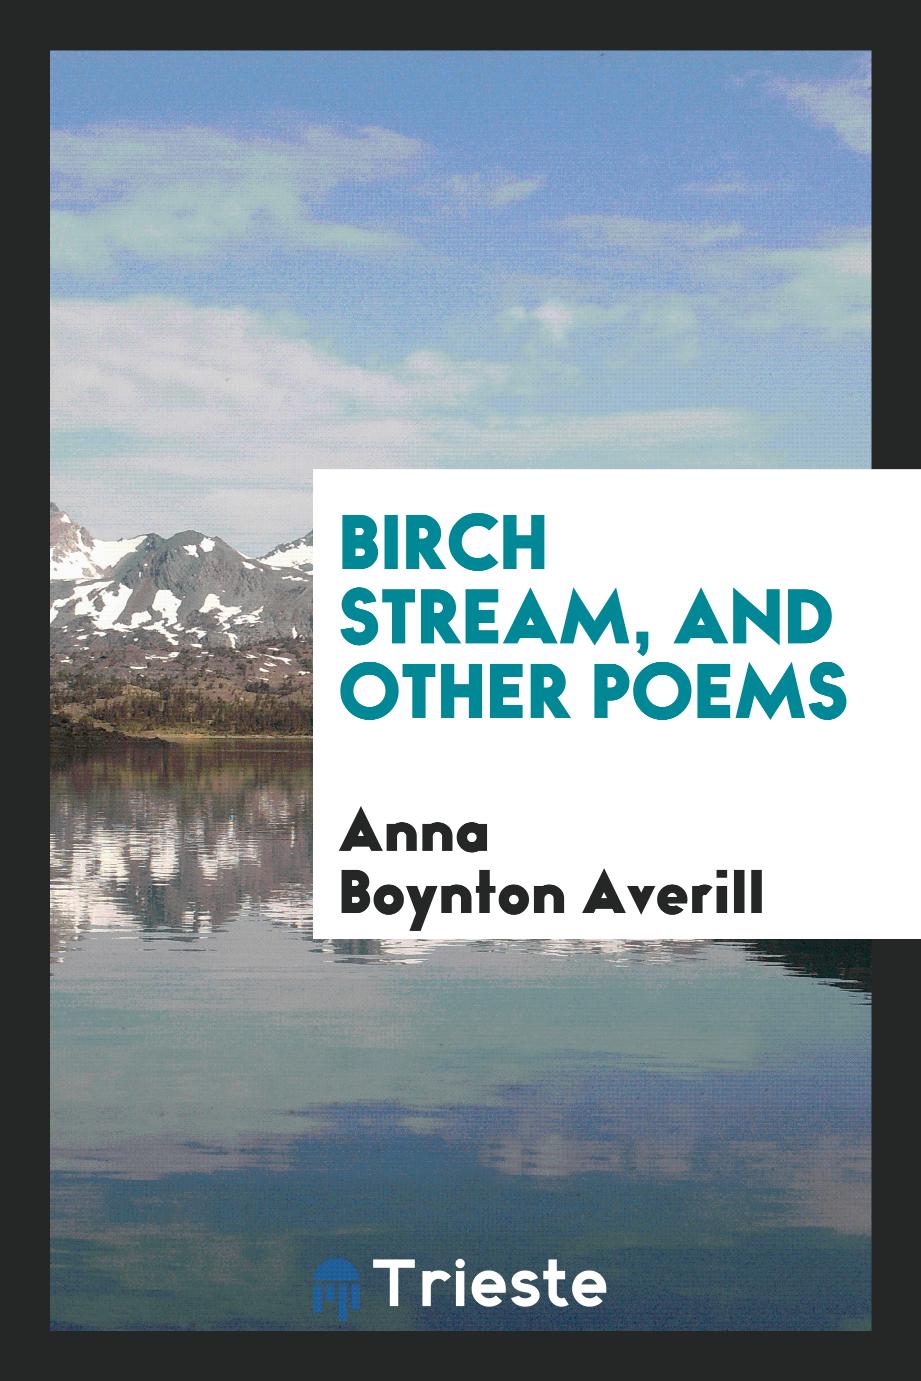 Birch Stream, and Other Poems